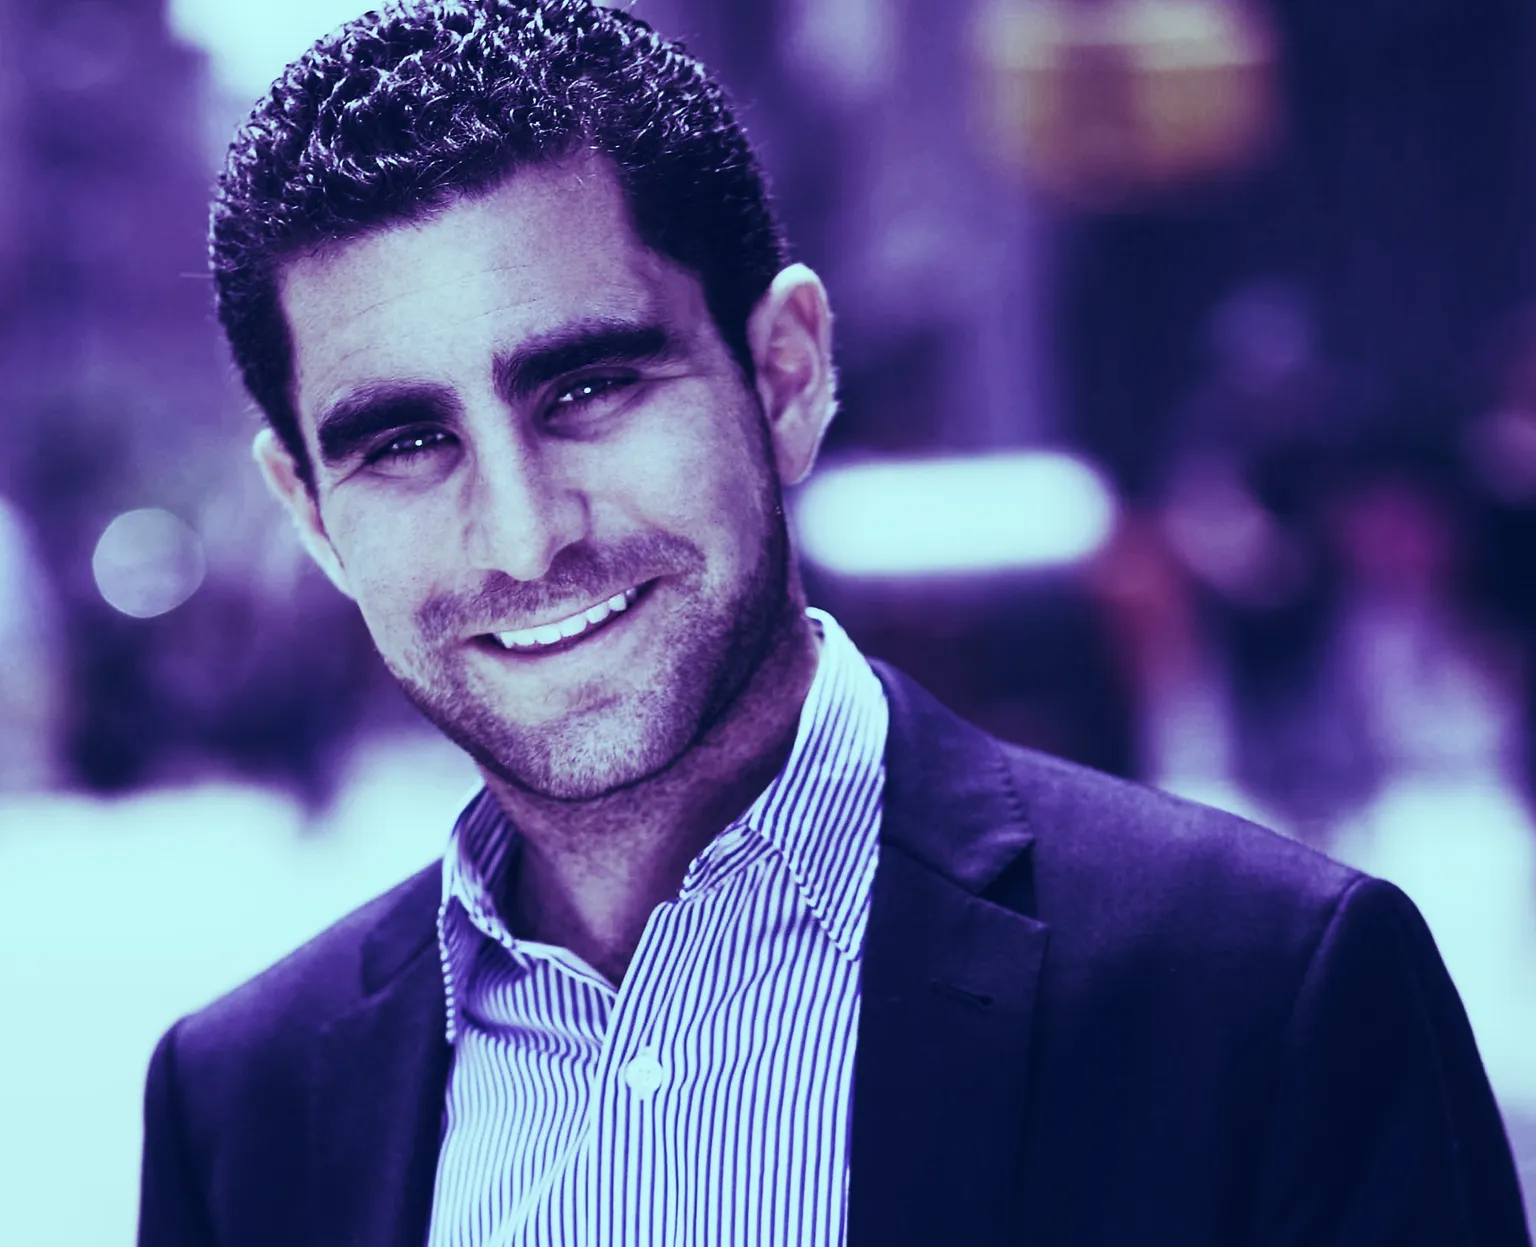 Charlie Shrem founded BitInstant, one of the first platforms for buying and selling crypto, in 2011. Image: Wikipedia